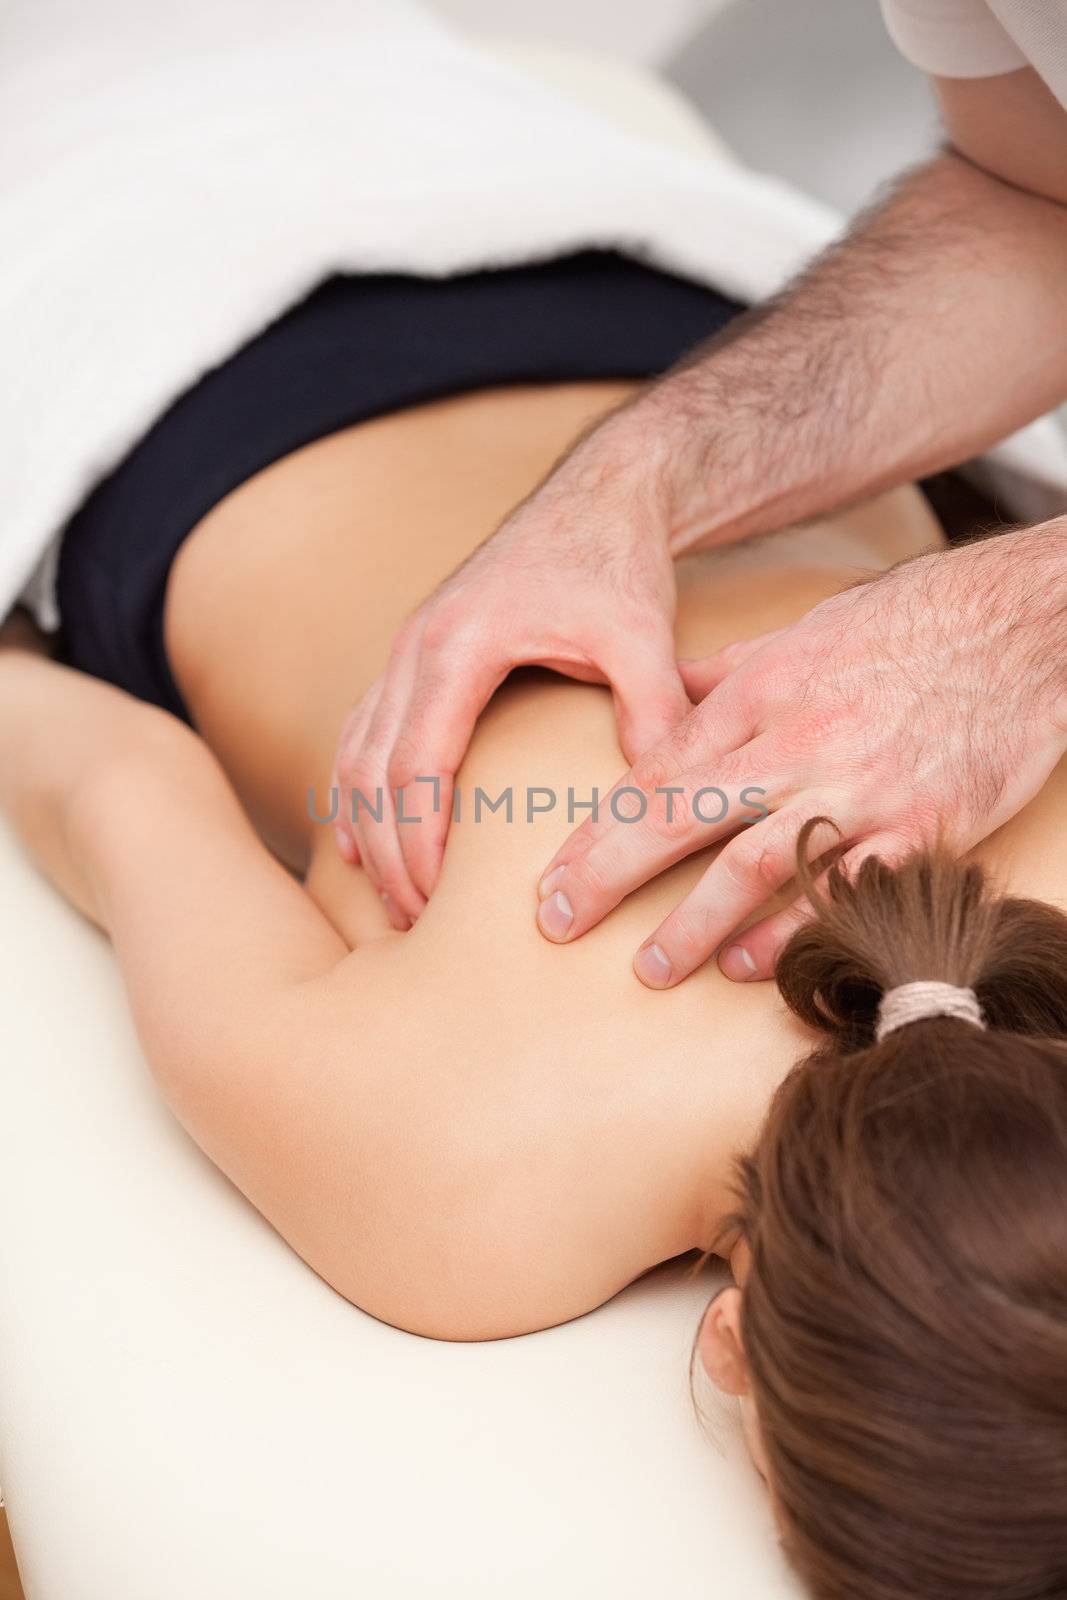 Woman lying on the table while being massaged in a room